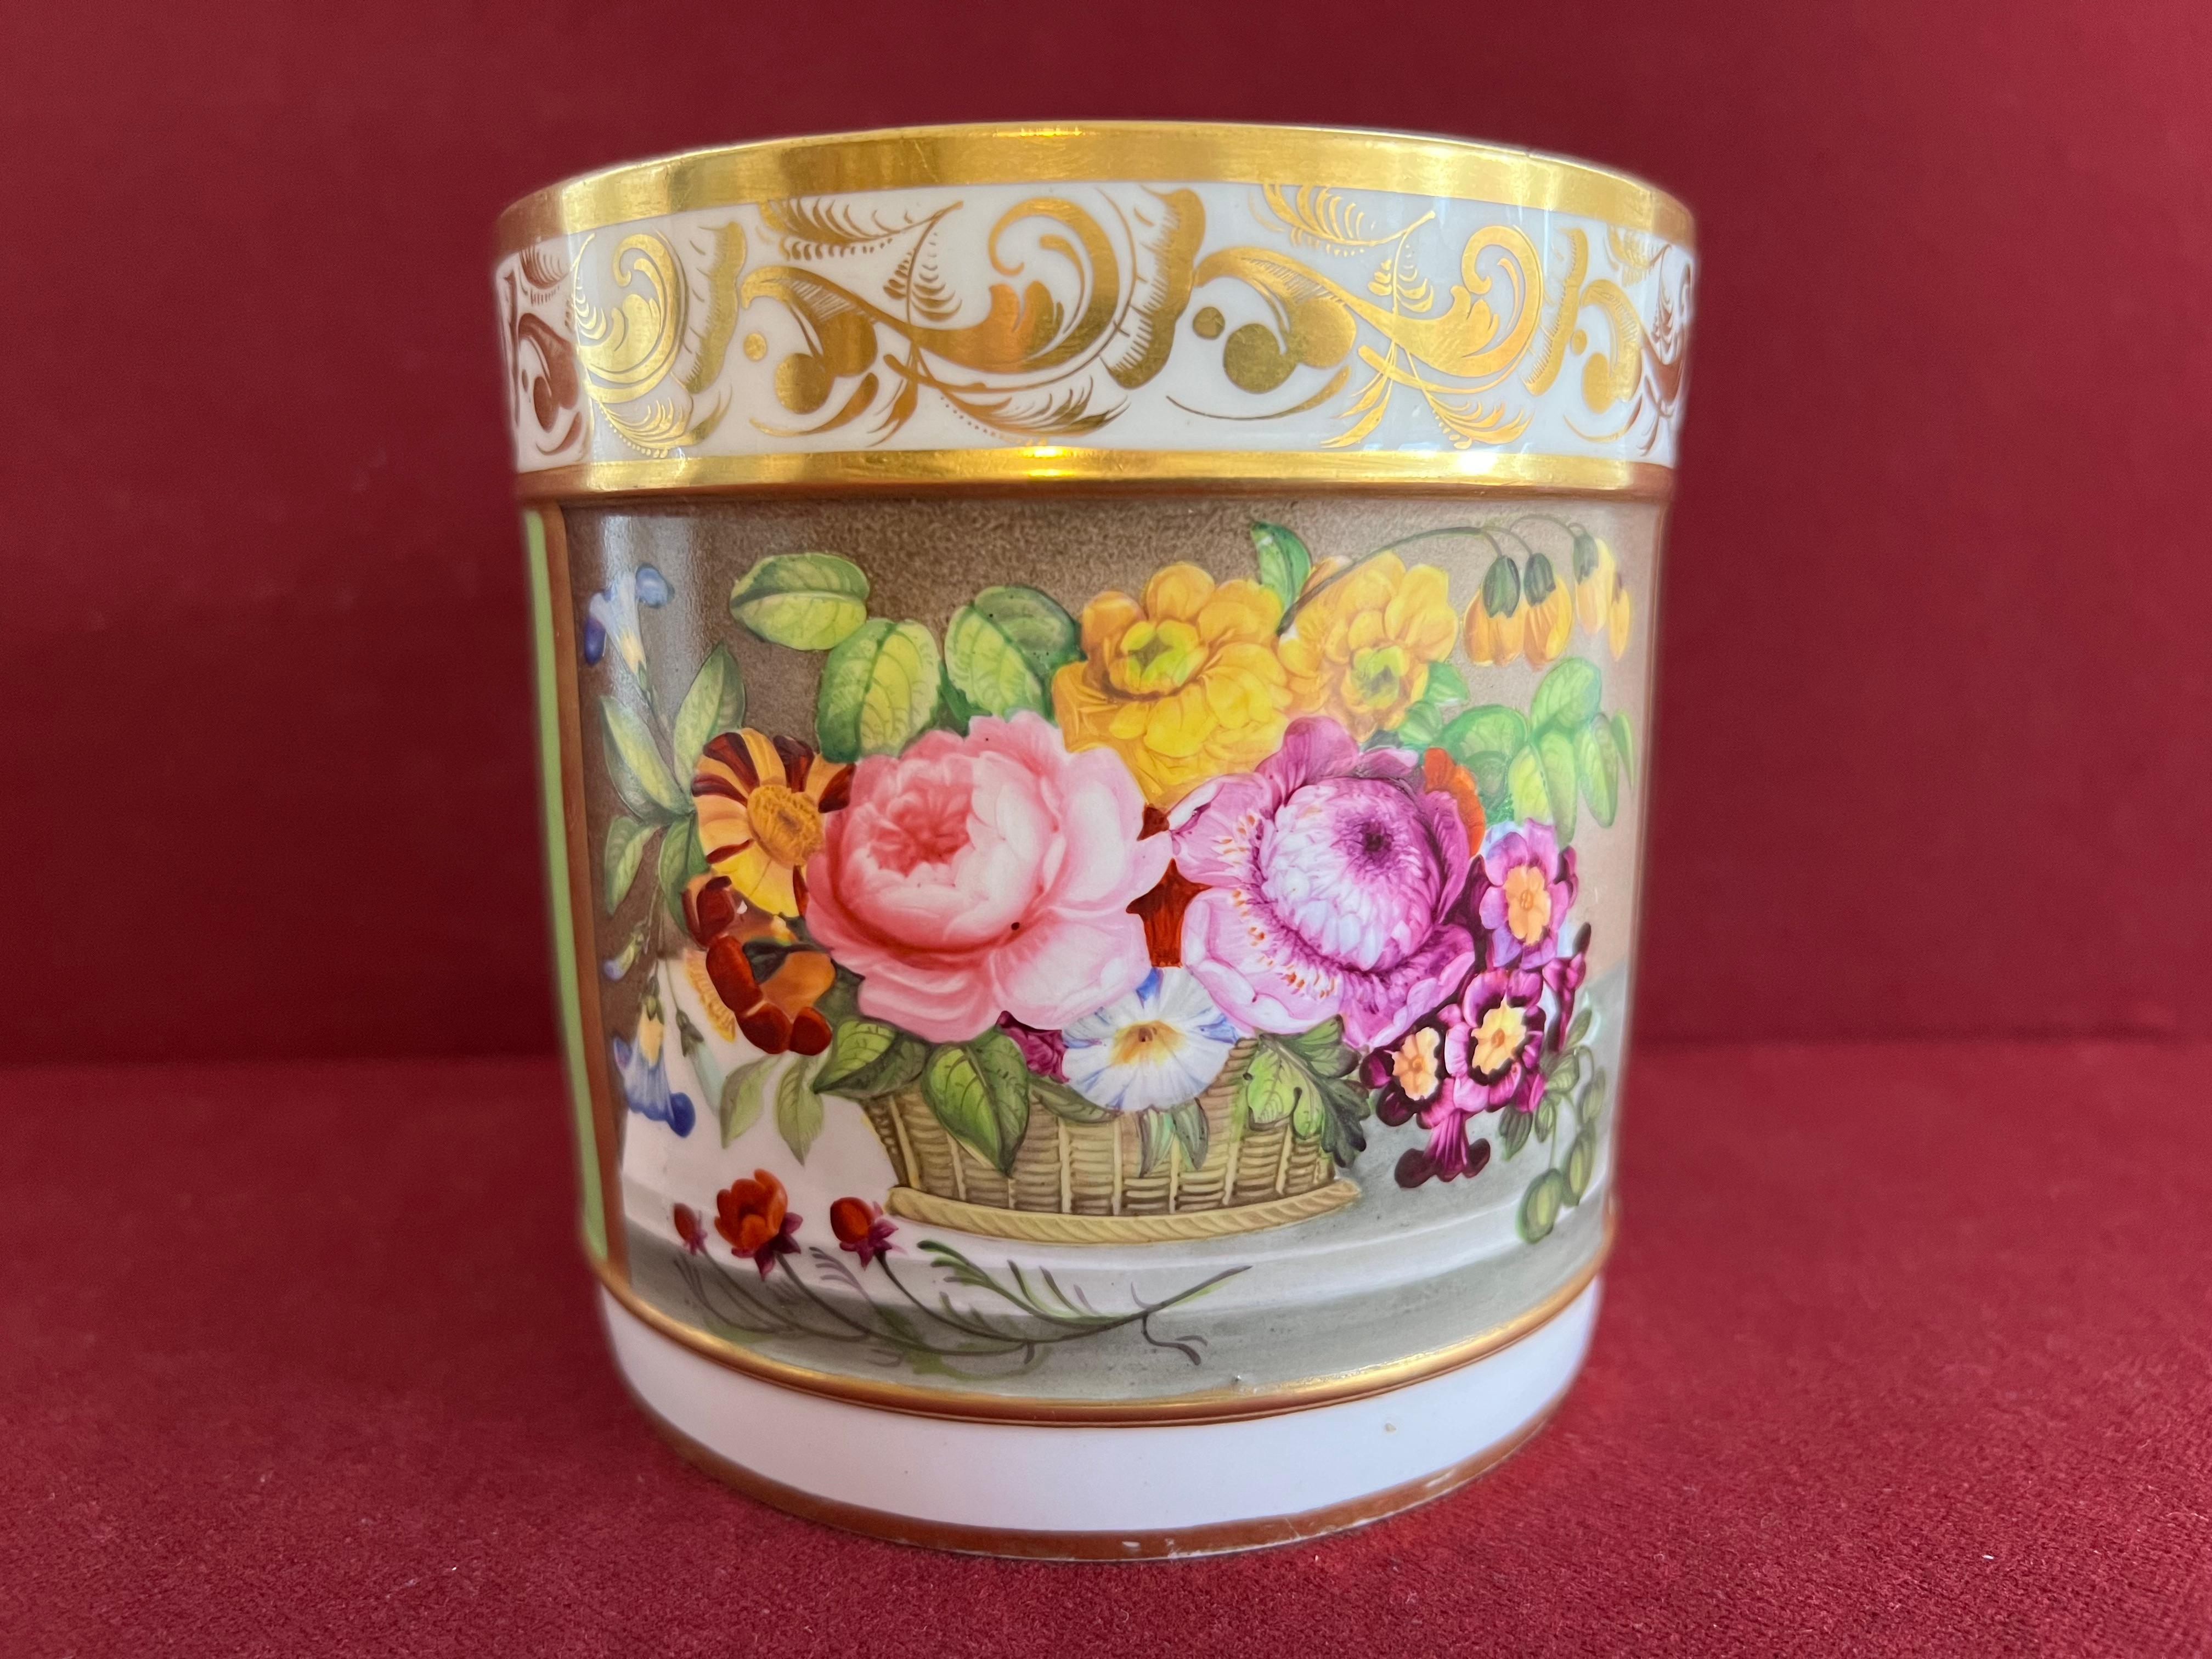 A fine Bloor Derby Porcelain porter mug c.1820-1825, finely decorated in the manner of Thomas Steel with a rectangular panel of flowers in a basket on a stone ledge, with a lime green ground beneath a gilt leaf scroll. Printed roundel mark in